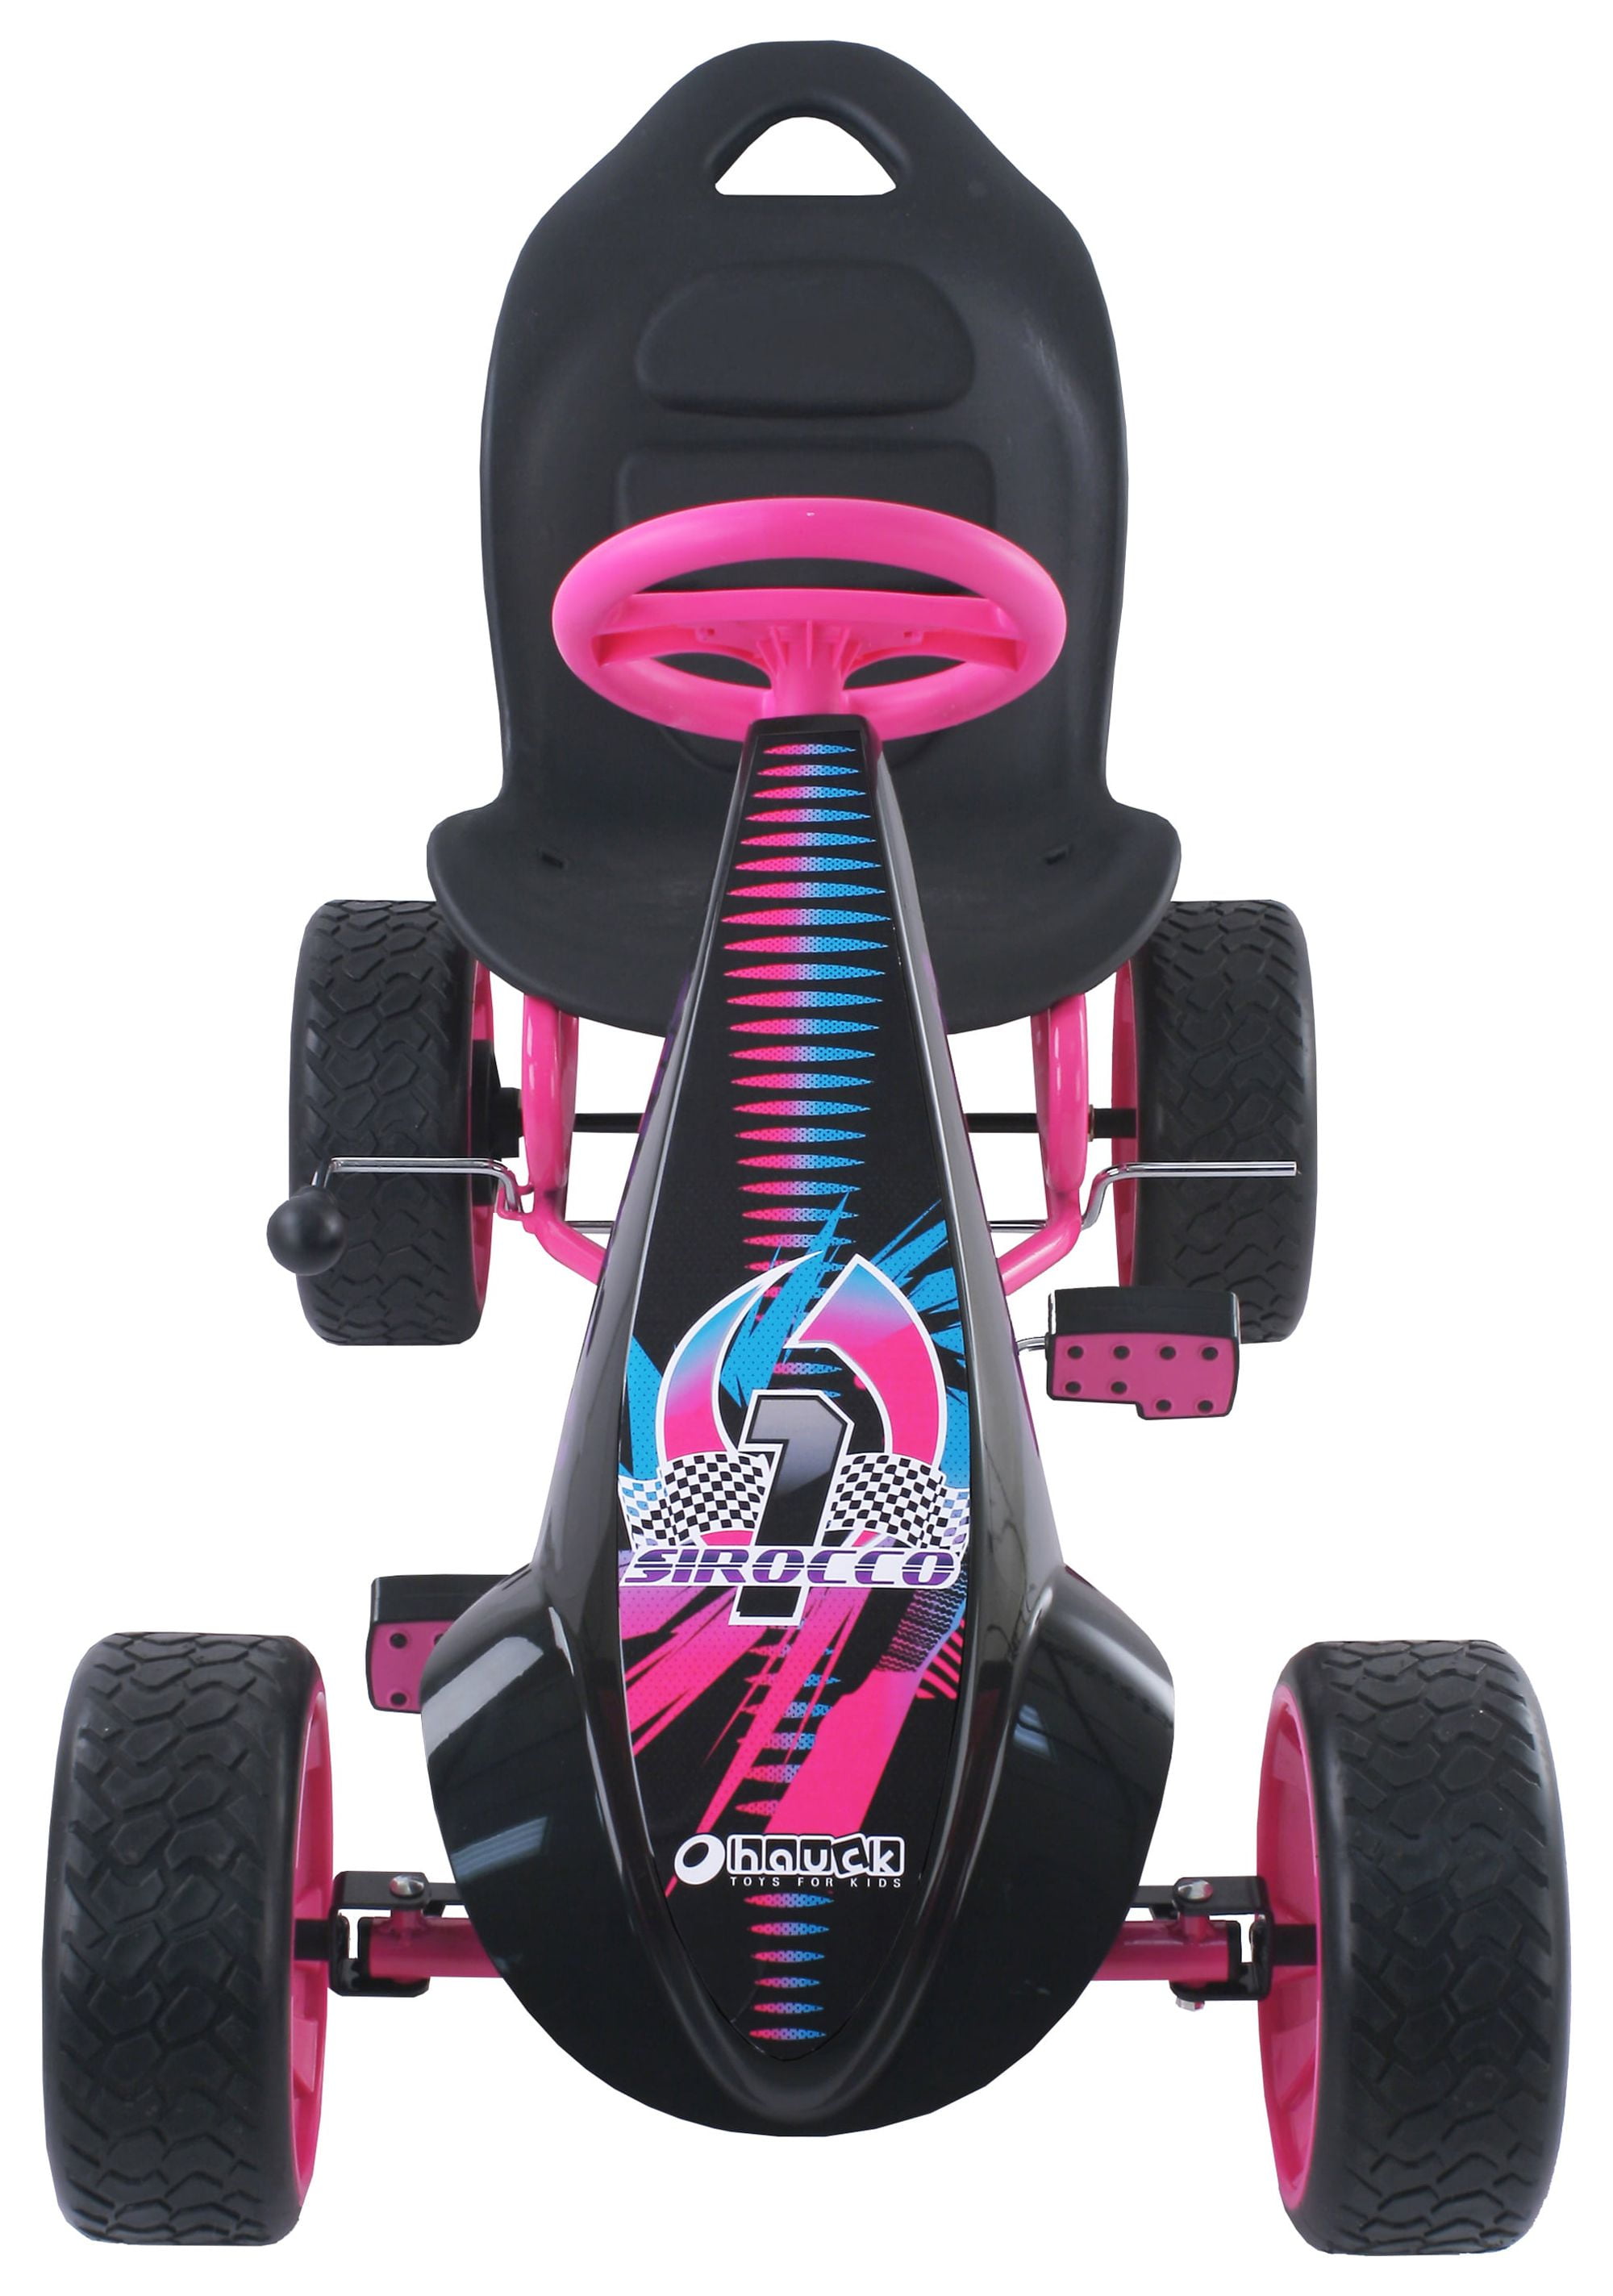 Hauck Sirocco - Racing Go Kart, Pedal Car, Low profile rubber tires, Pedal